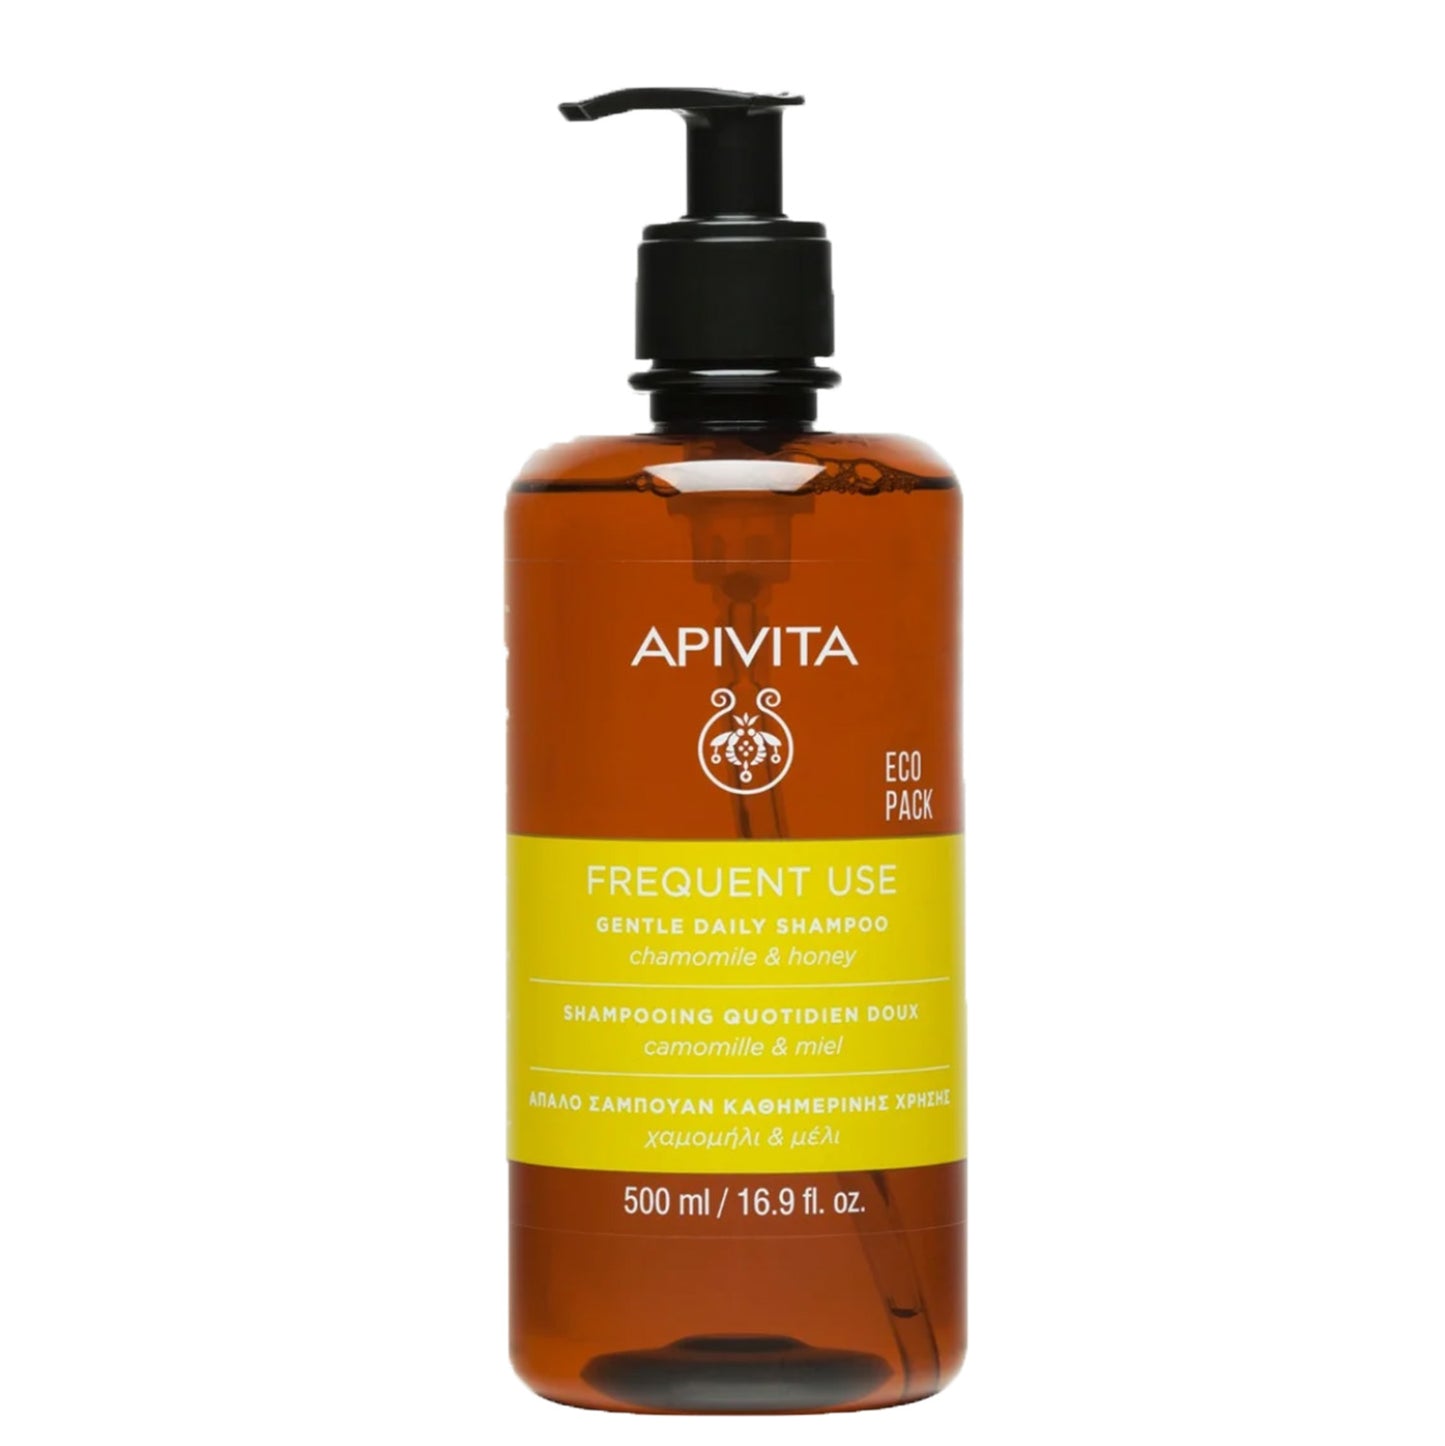 Apivita Frequent use Gentle Daily Shampoo, formulated with 93% natural origin ingredients, cleanses extra gently for a healthy scalp & soft, supple hair